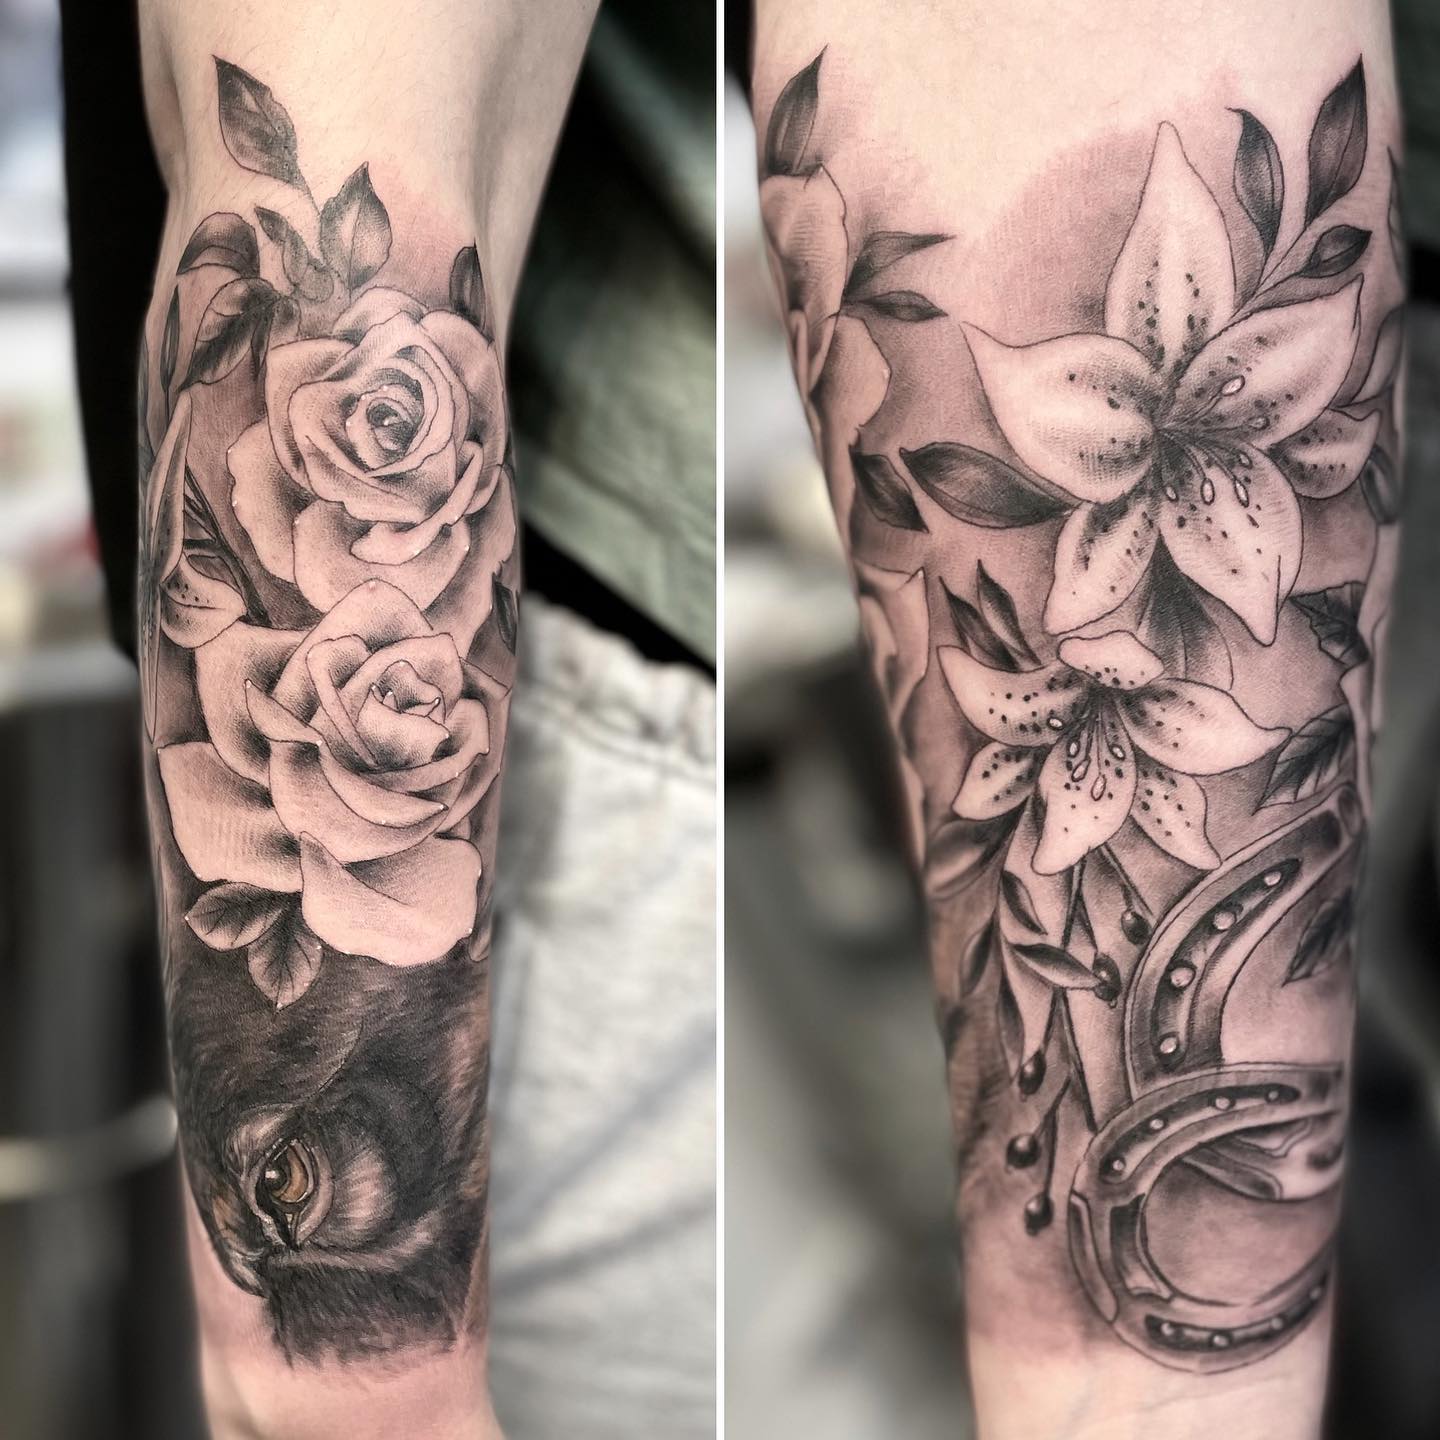 Lily tattoos are colorful most of the time but why not using black ink to create a contrast? To show this contrast, let's cover your lower arm with black lilies with roses. It looks pretty cool!